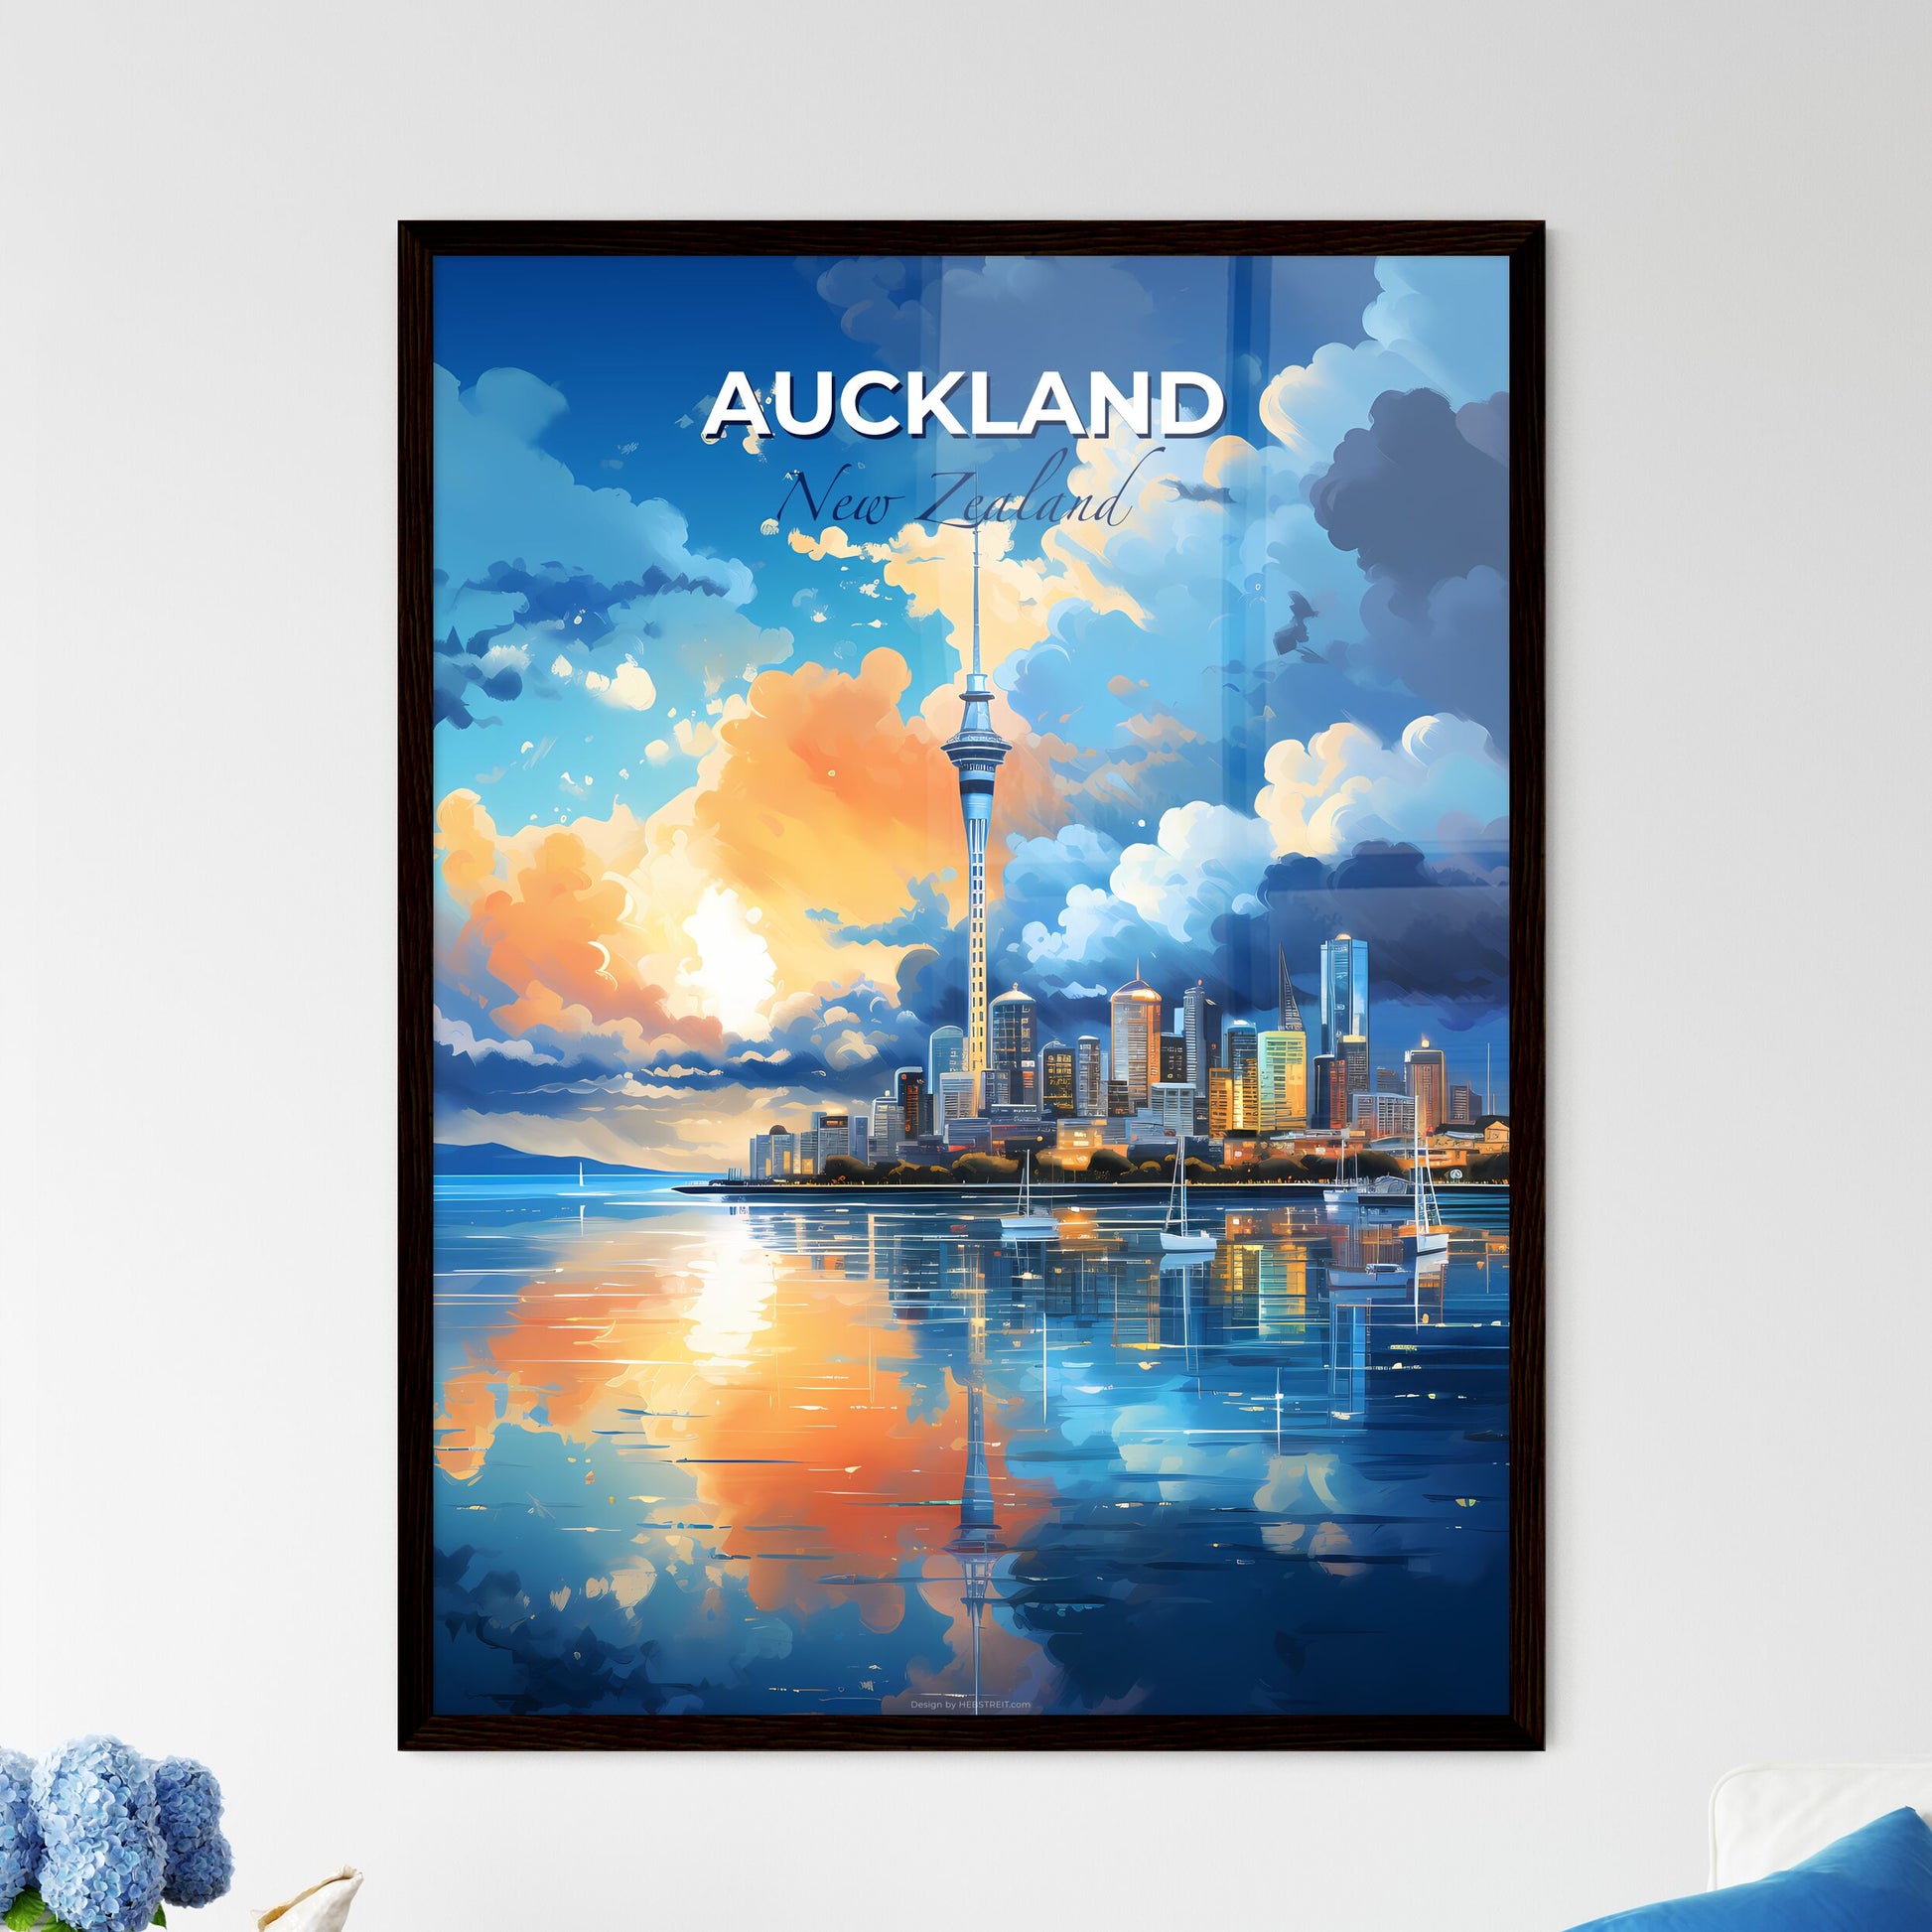 Auckland New Zealand Skyline - A City Skyline With Boats On Water - Customizable Travel Gift Default Title